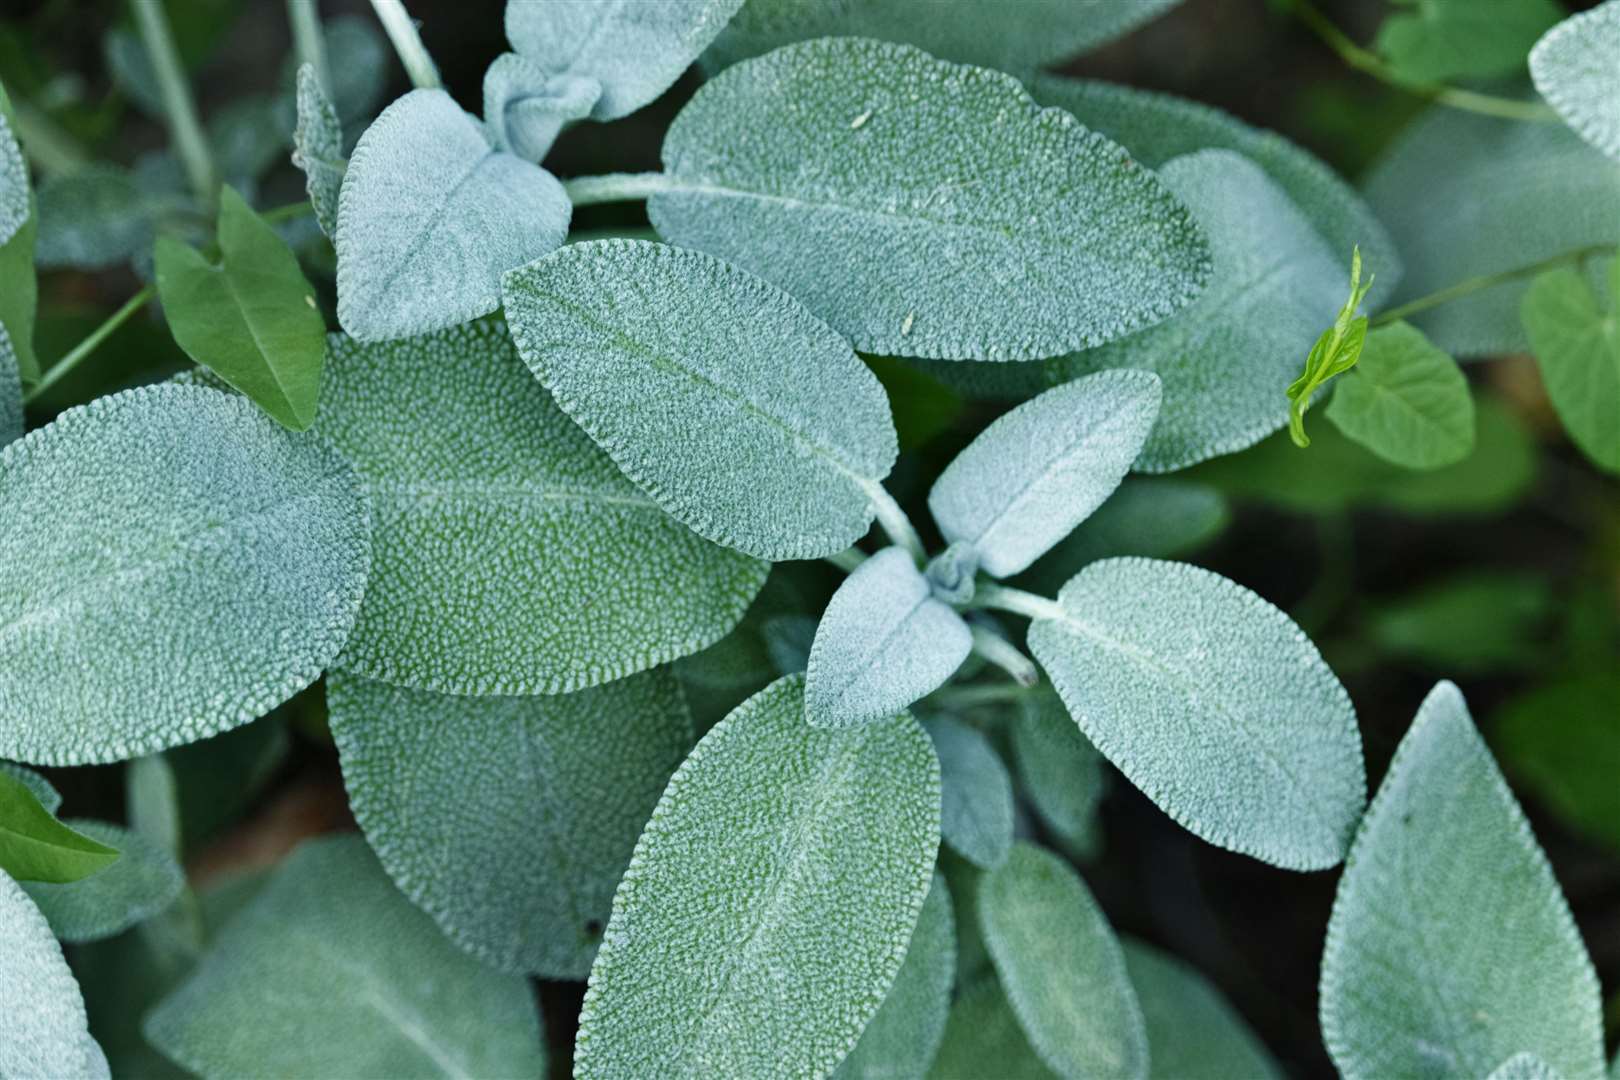 Undated Handout Photo of sage leaves. See PA Feature GARDENING Advice Herbs. Picture credit should read: iStock/PA. WARNING: This picture must only be used to accompany PA Feature GARDENING Advice Herbs.